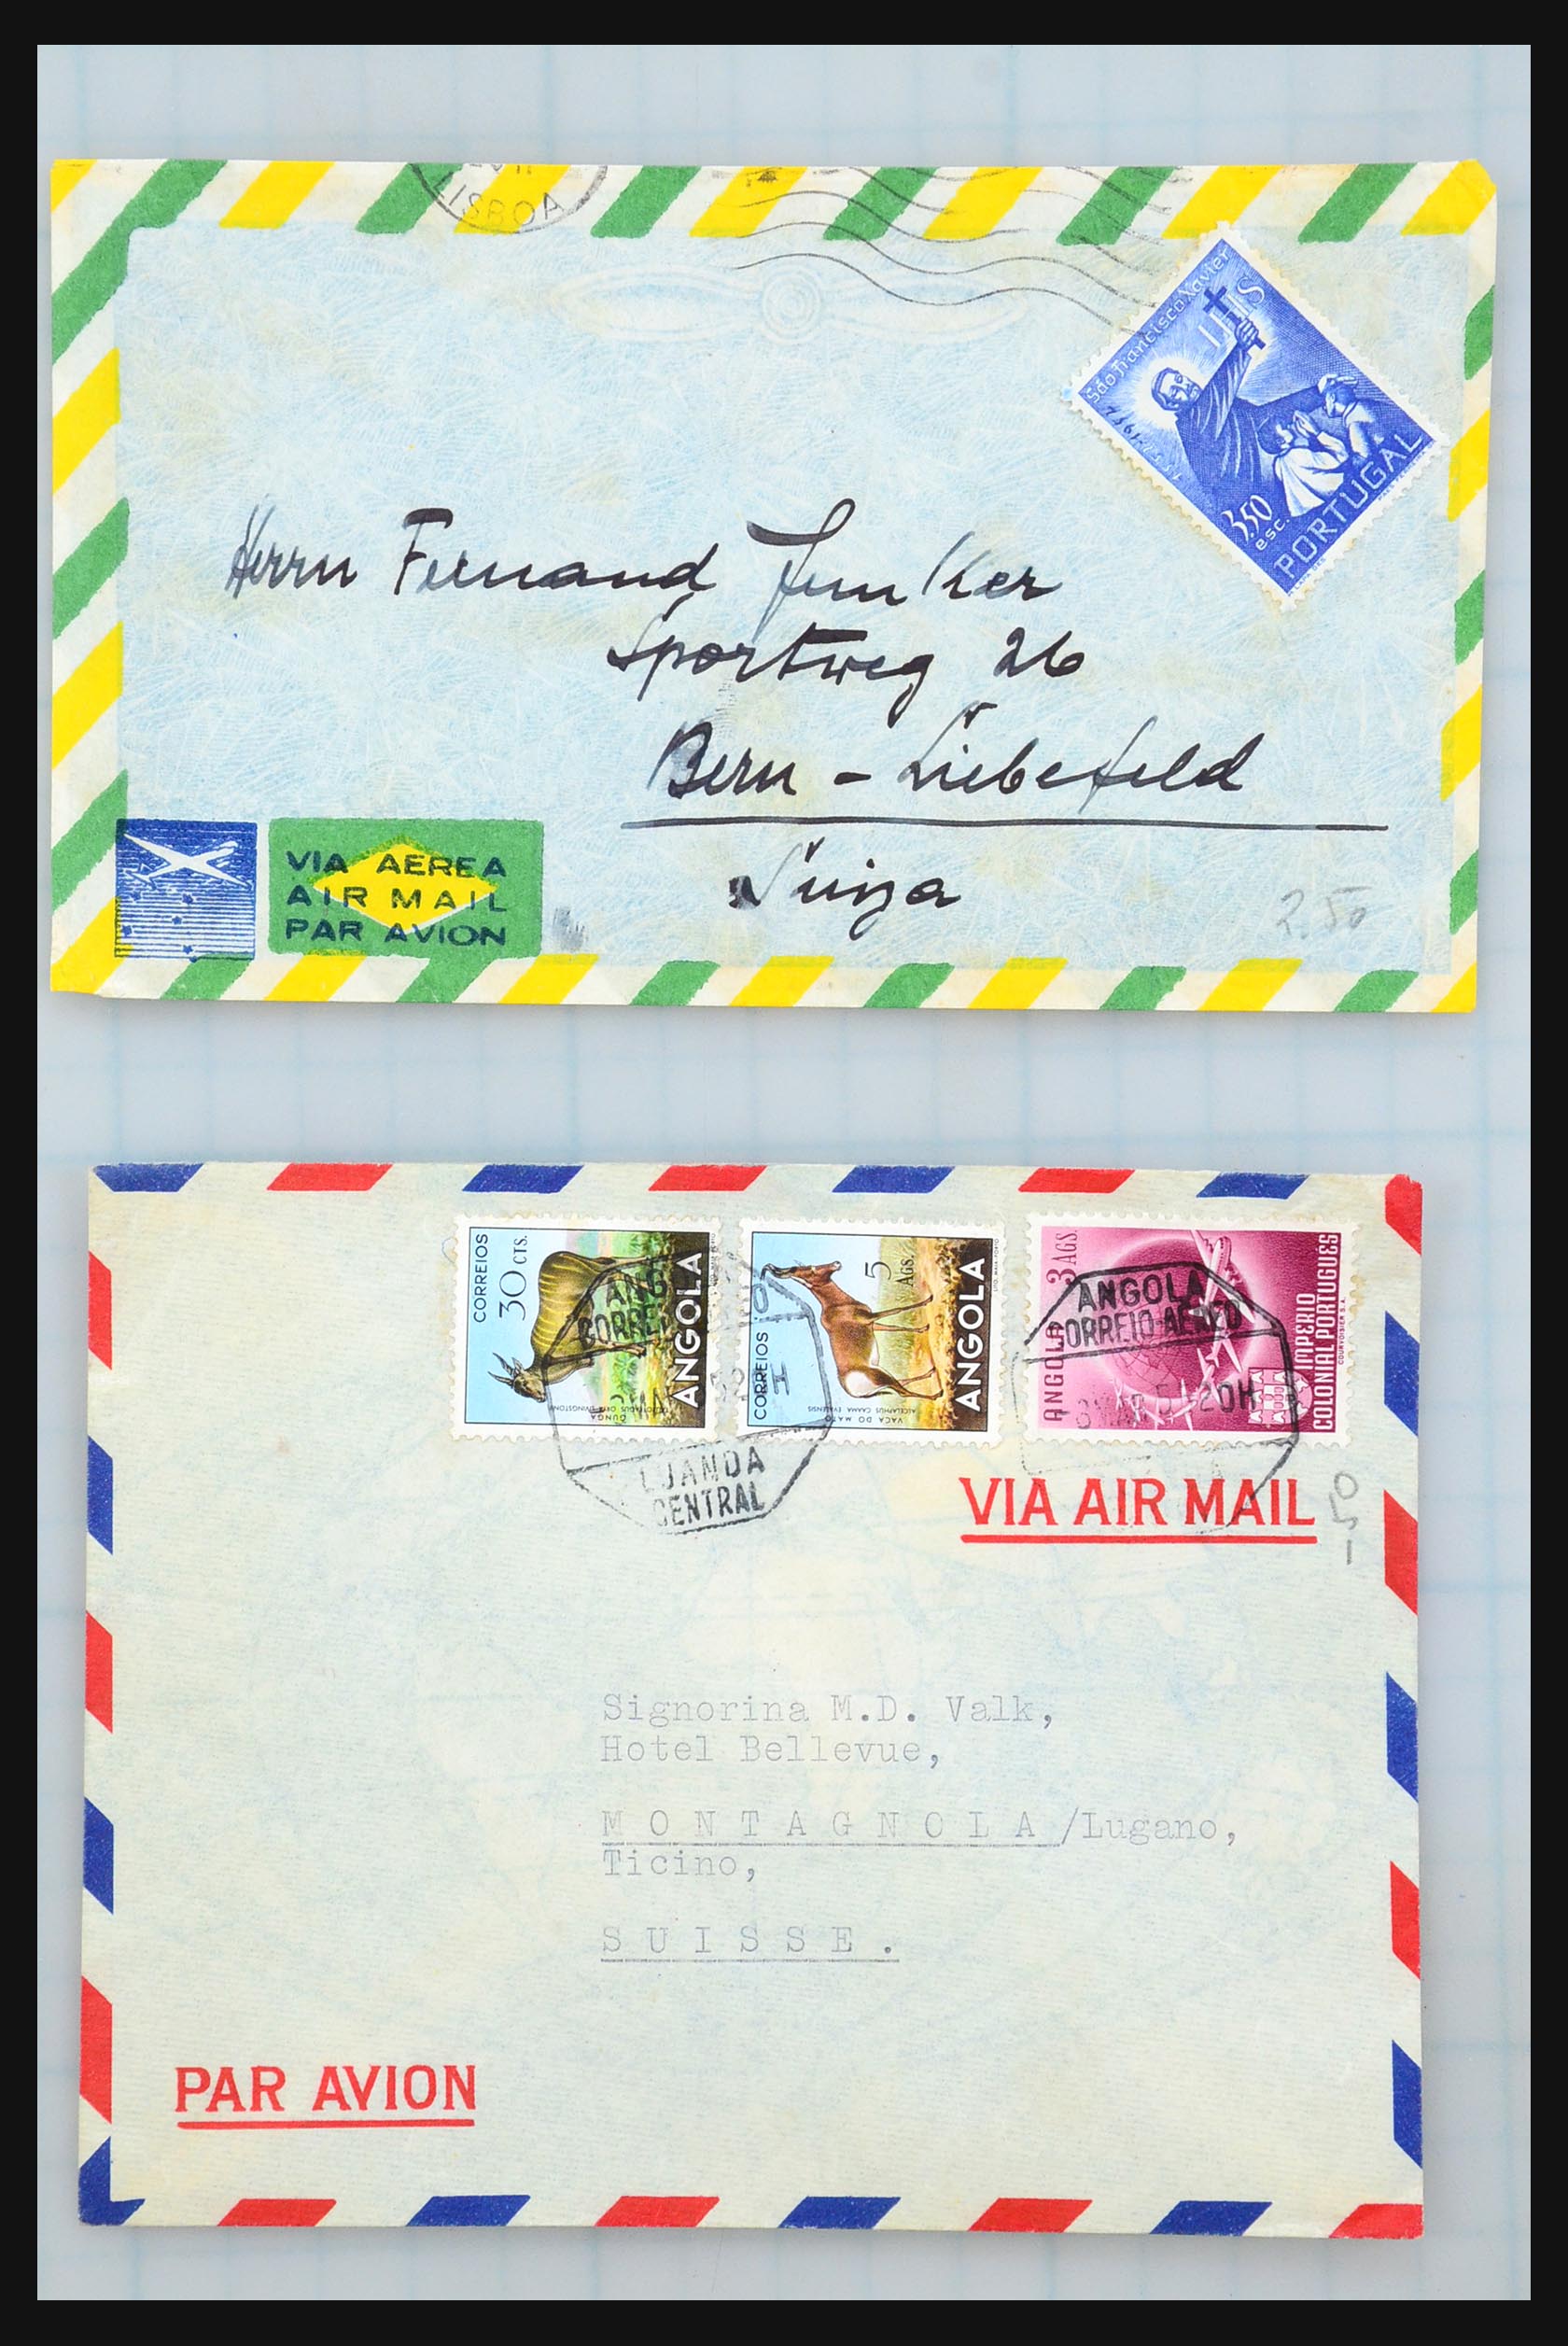 31358 249 - 31358 Portugal/Luxemburg/Greece covers 1880-1960.